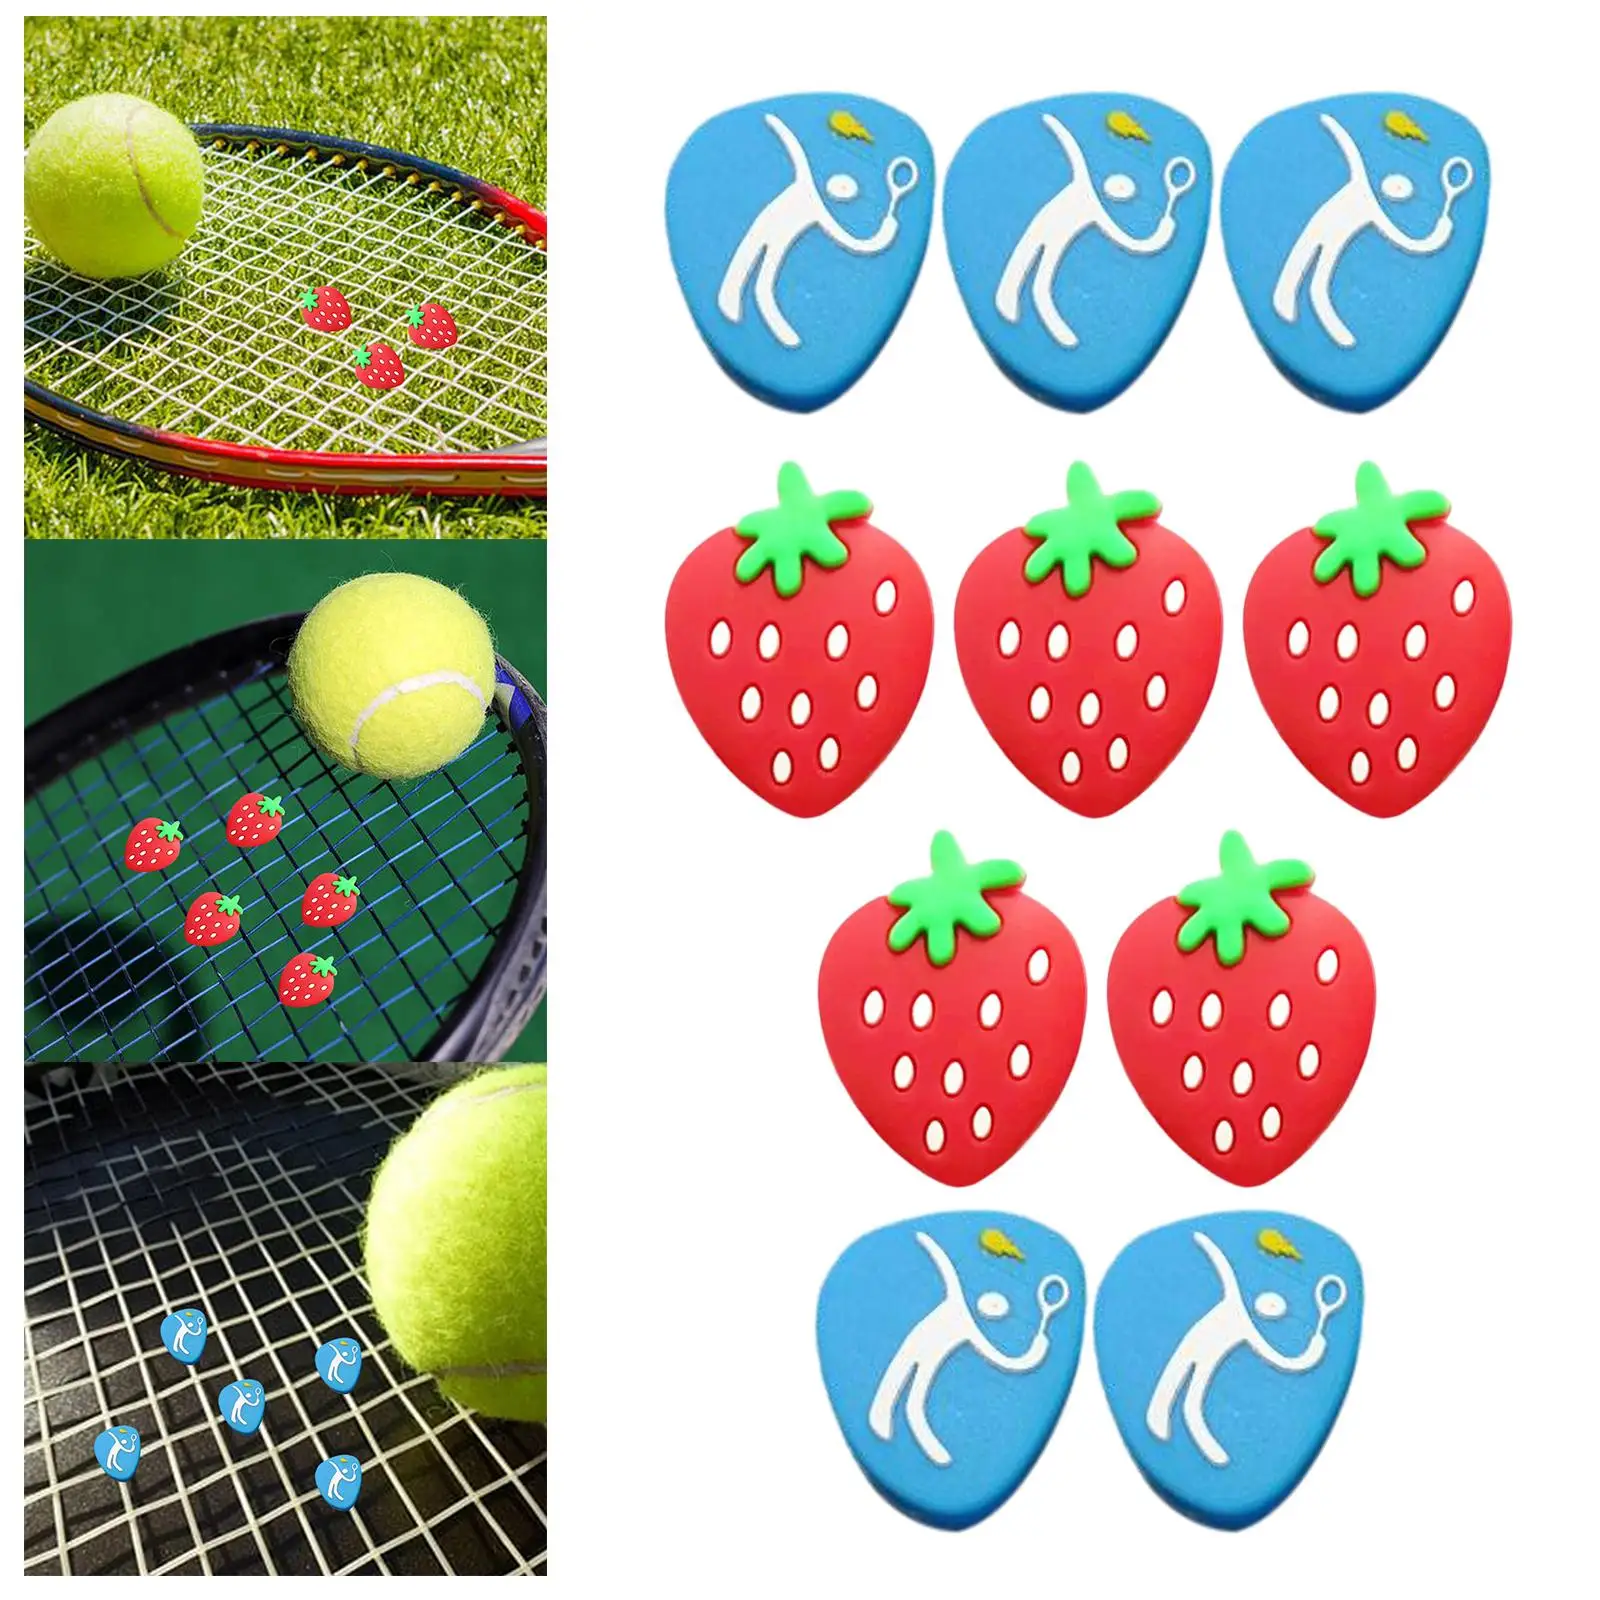 5Pcs Silicone Tennis Vibration Dampener Shock Absorber Shock Absorption Tennis Dampener Damper Players Gift Accessories